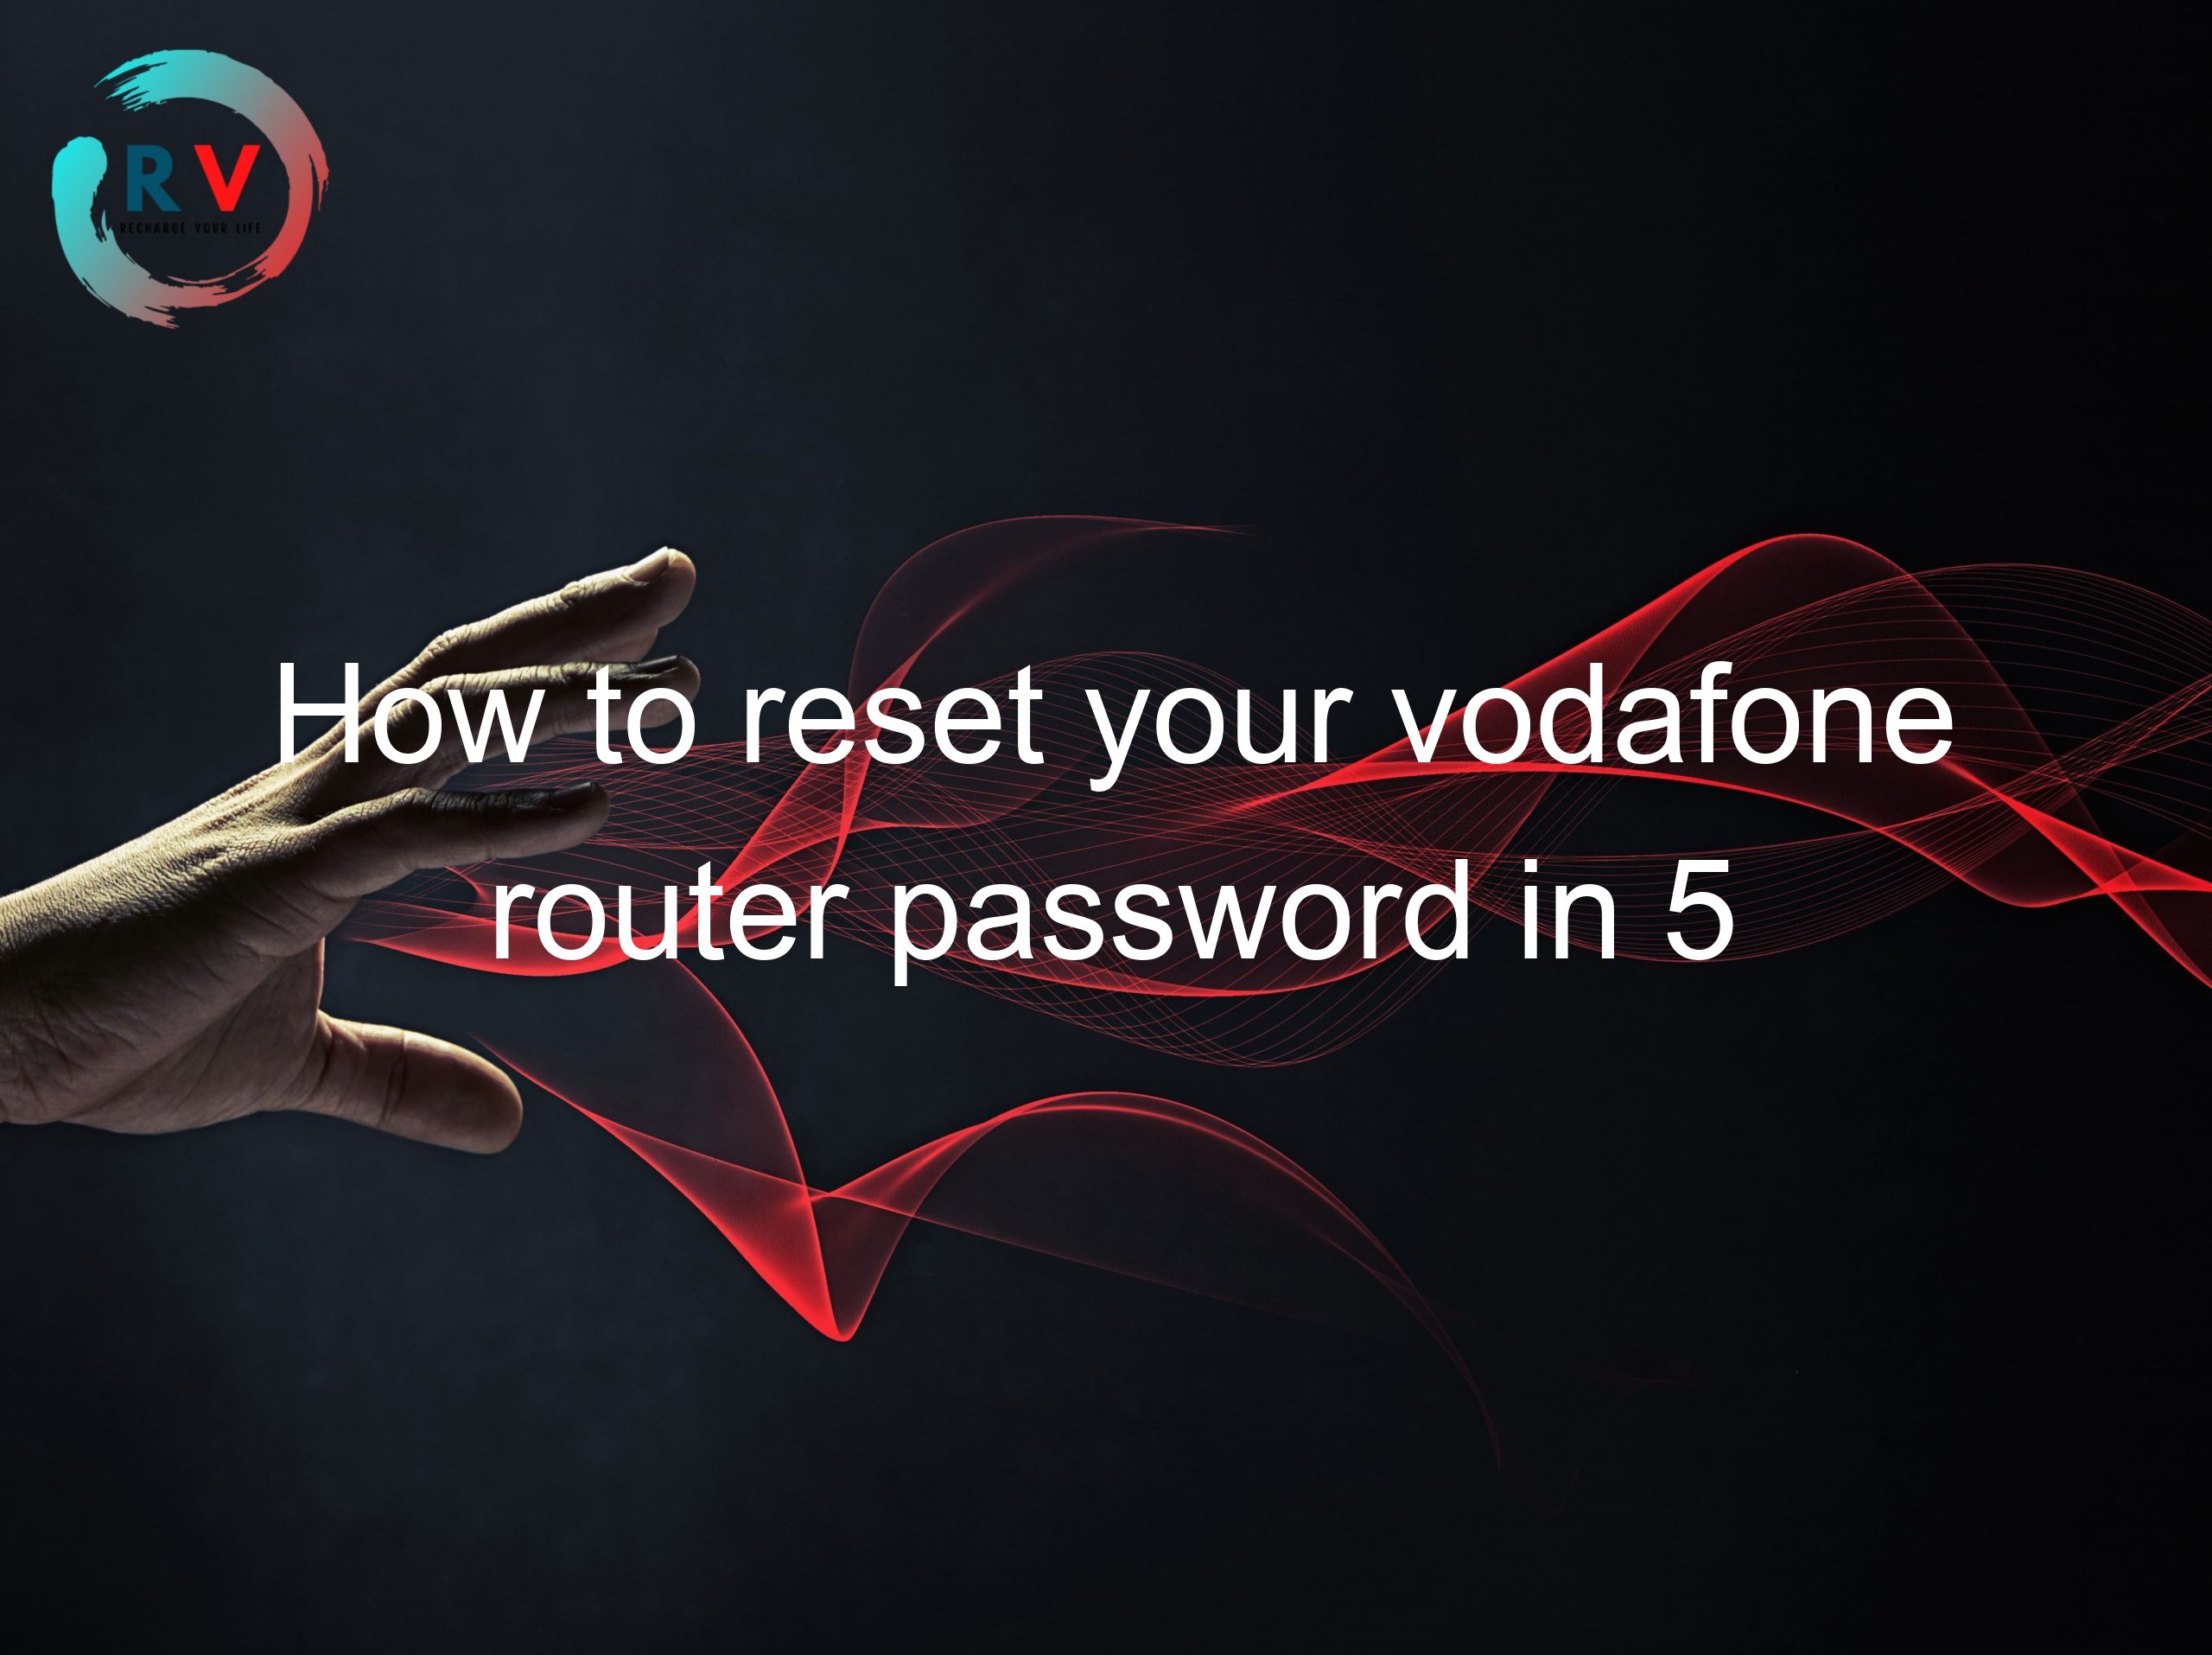 How to reset your vodafone router password in 5 minutes